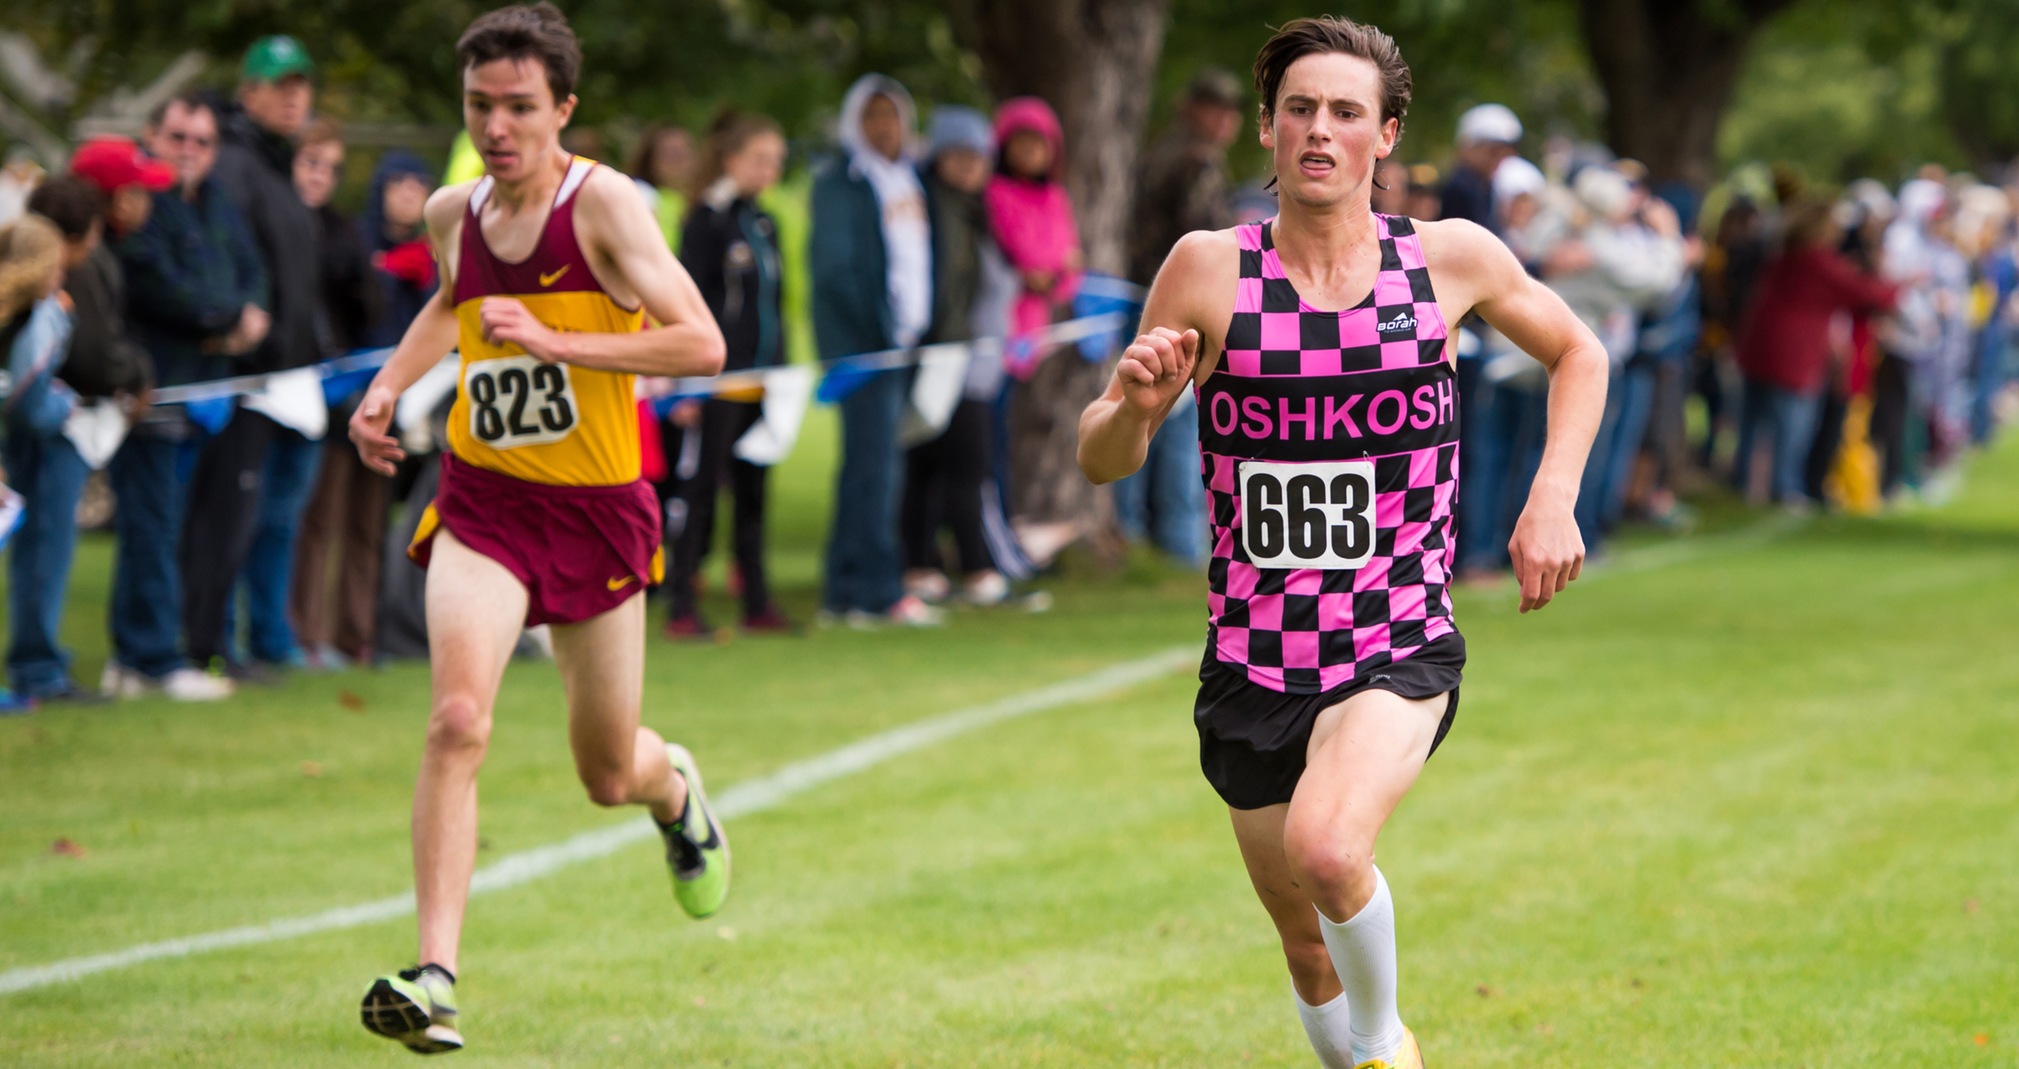 Lucas Weber finished fourth among 362 runners at the Kollege Town Sports Invitational.